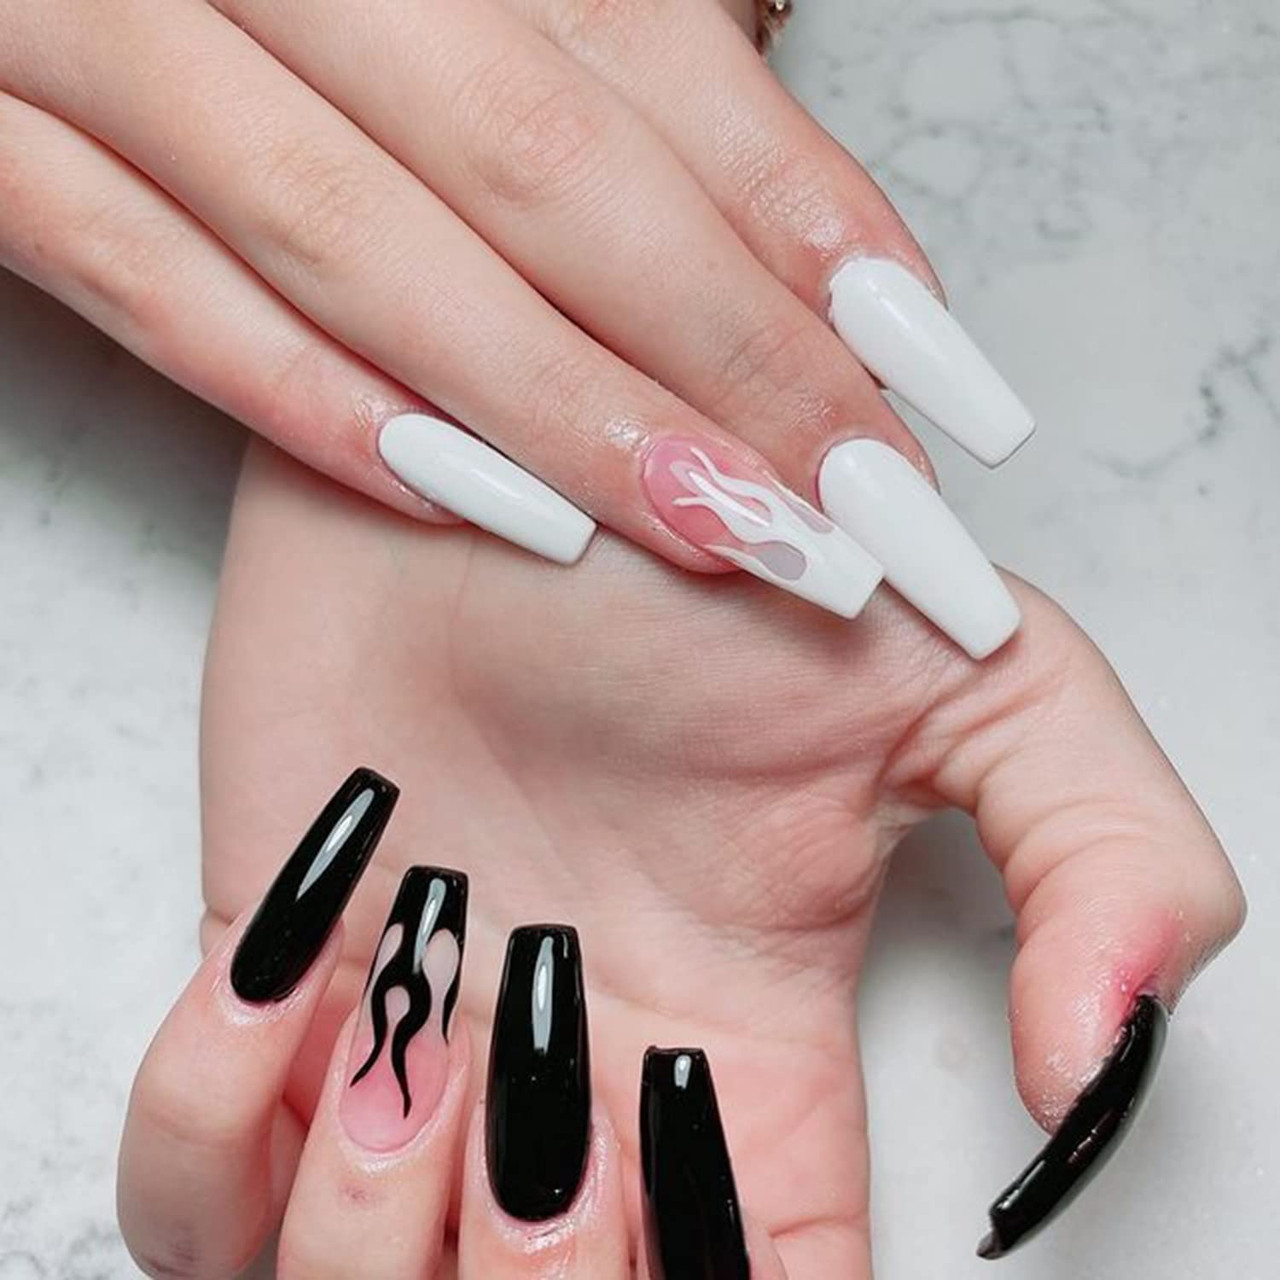 23 Best Black and White Nail Ideas and Designs to Copy in 2022